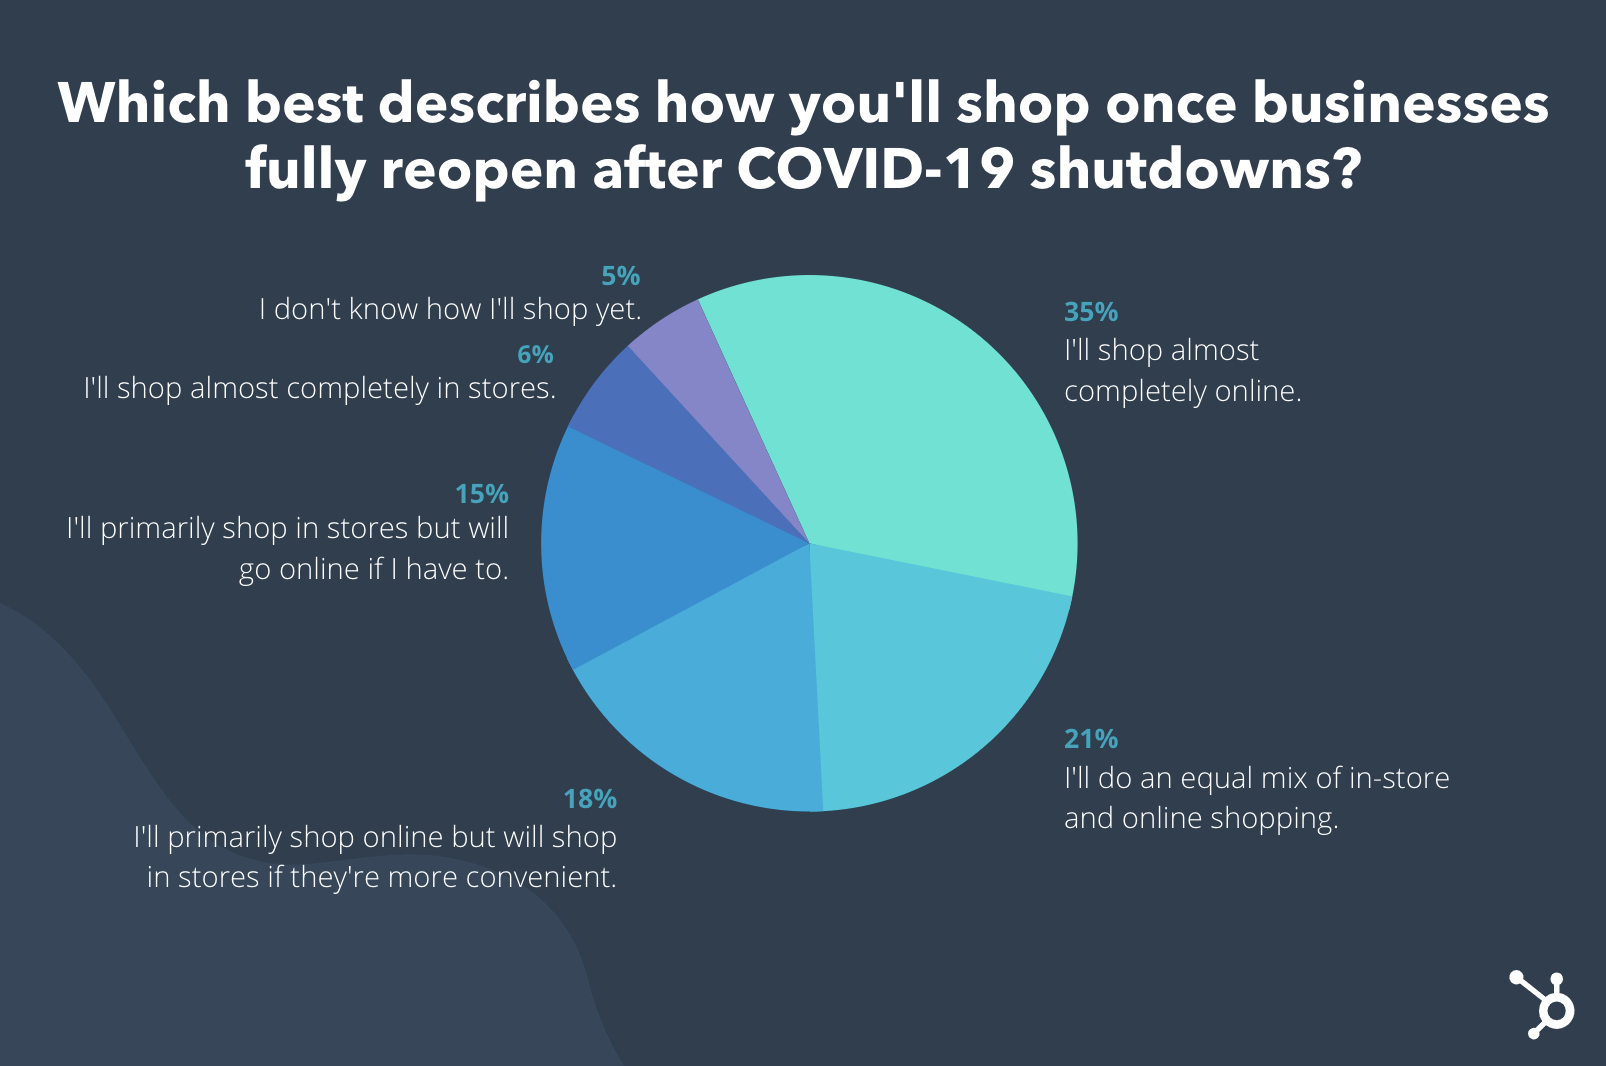 35% of respondents plan to shop mostly online after store reopenings.